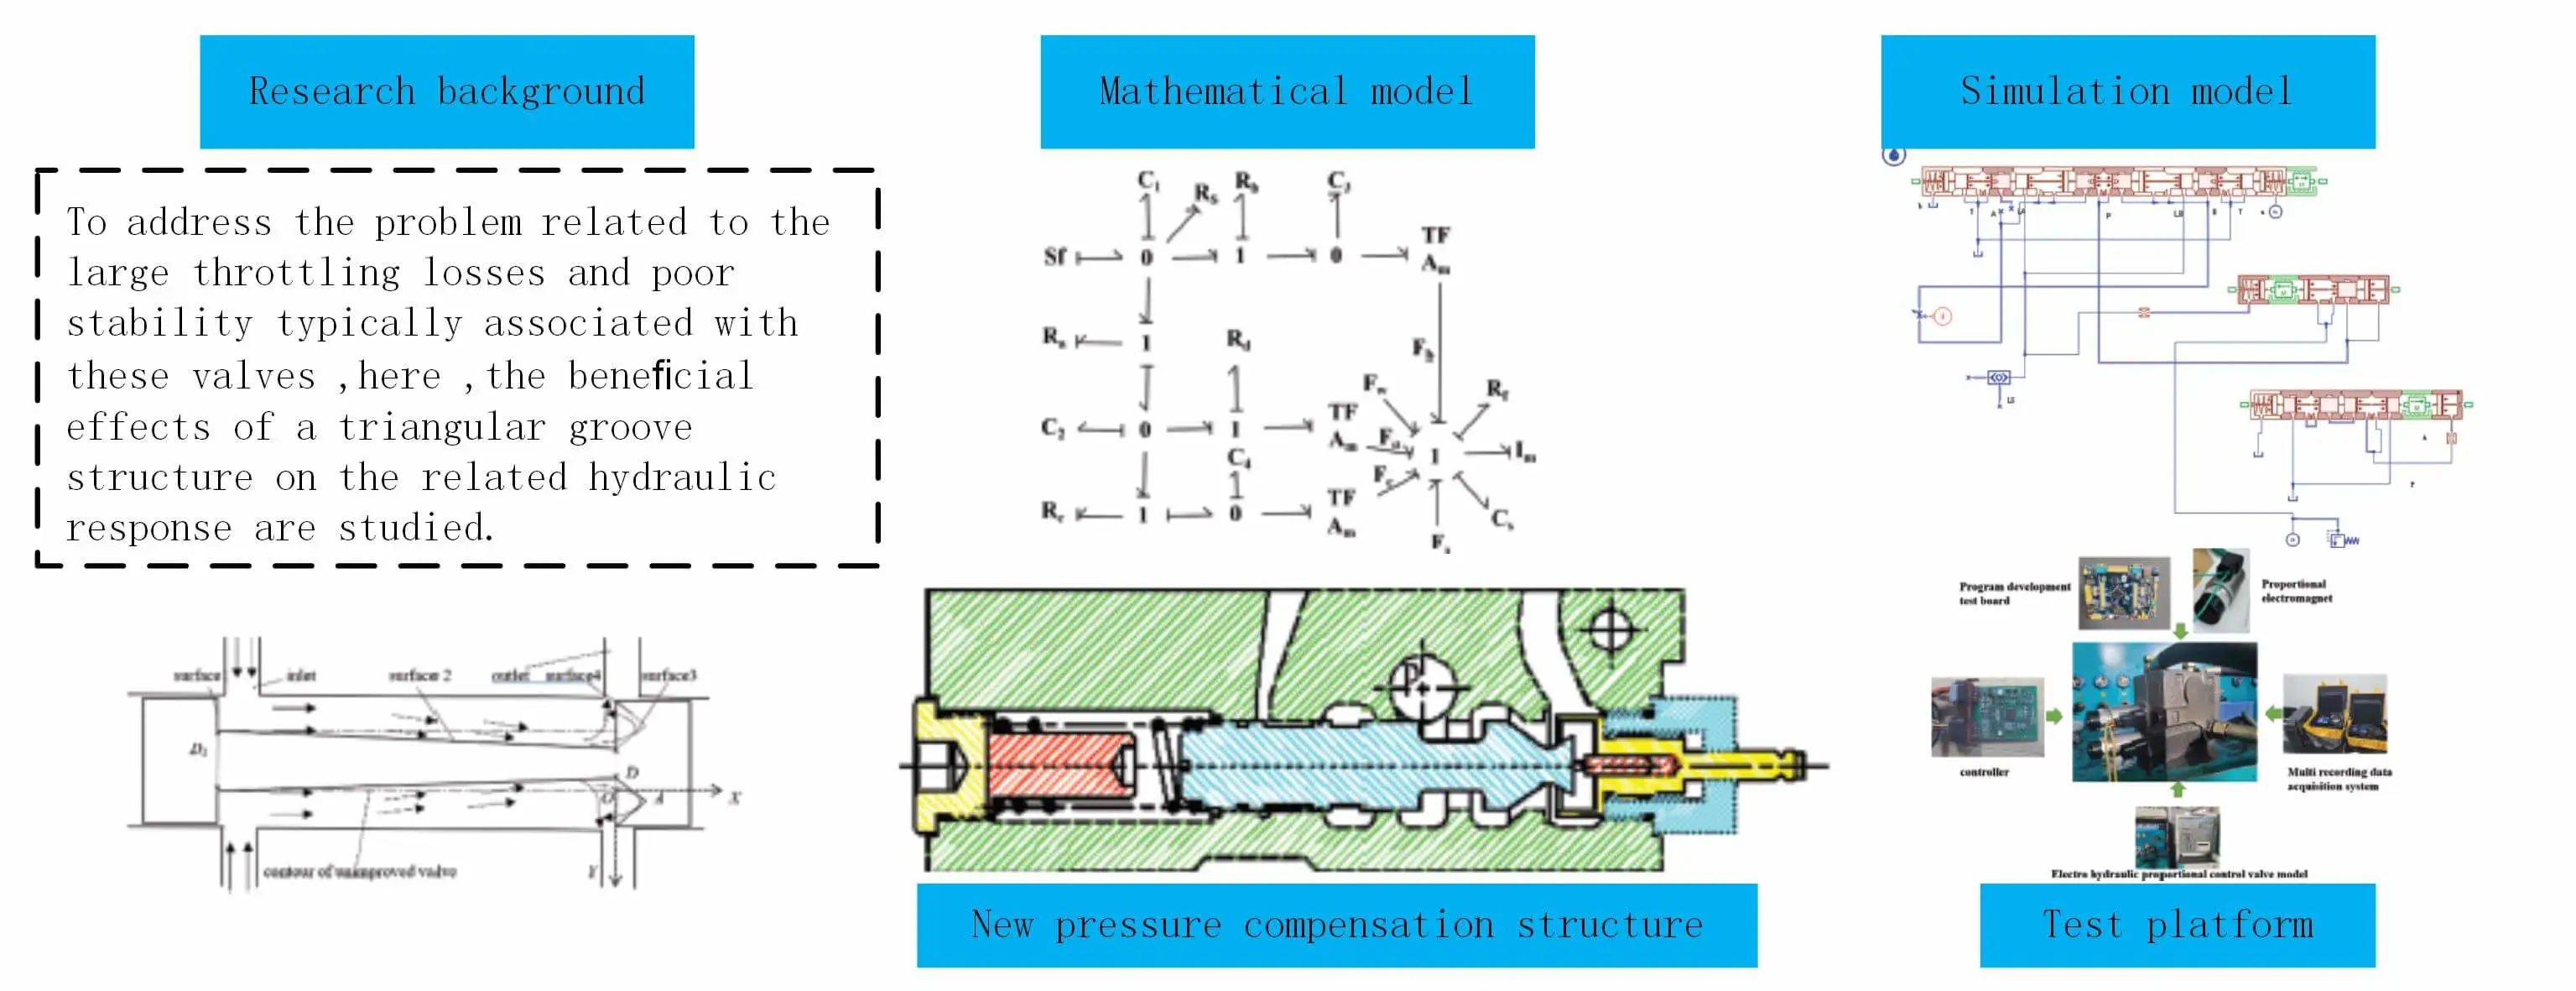 An Analysis of the Static and Dynamic Behavior of the Hydraulic Compensation System of a Multichannel Valve